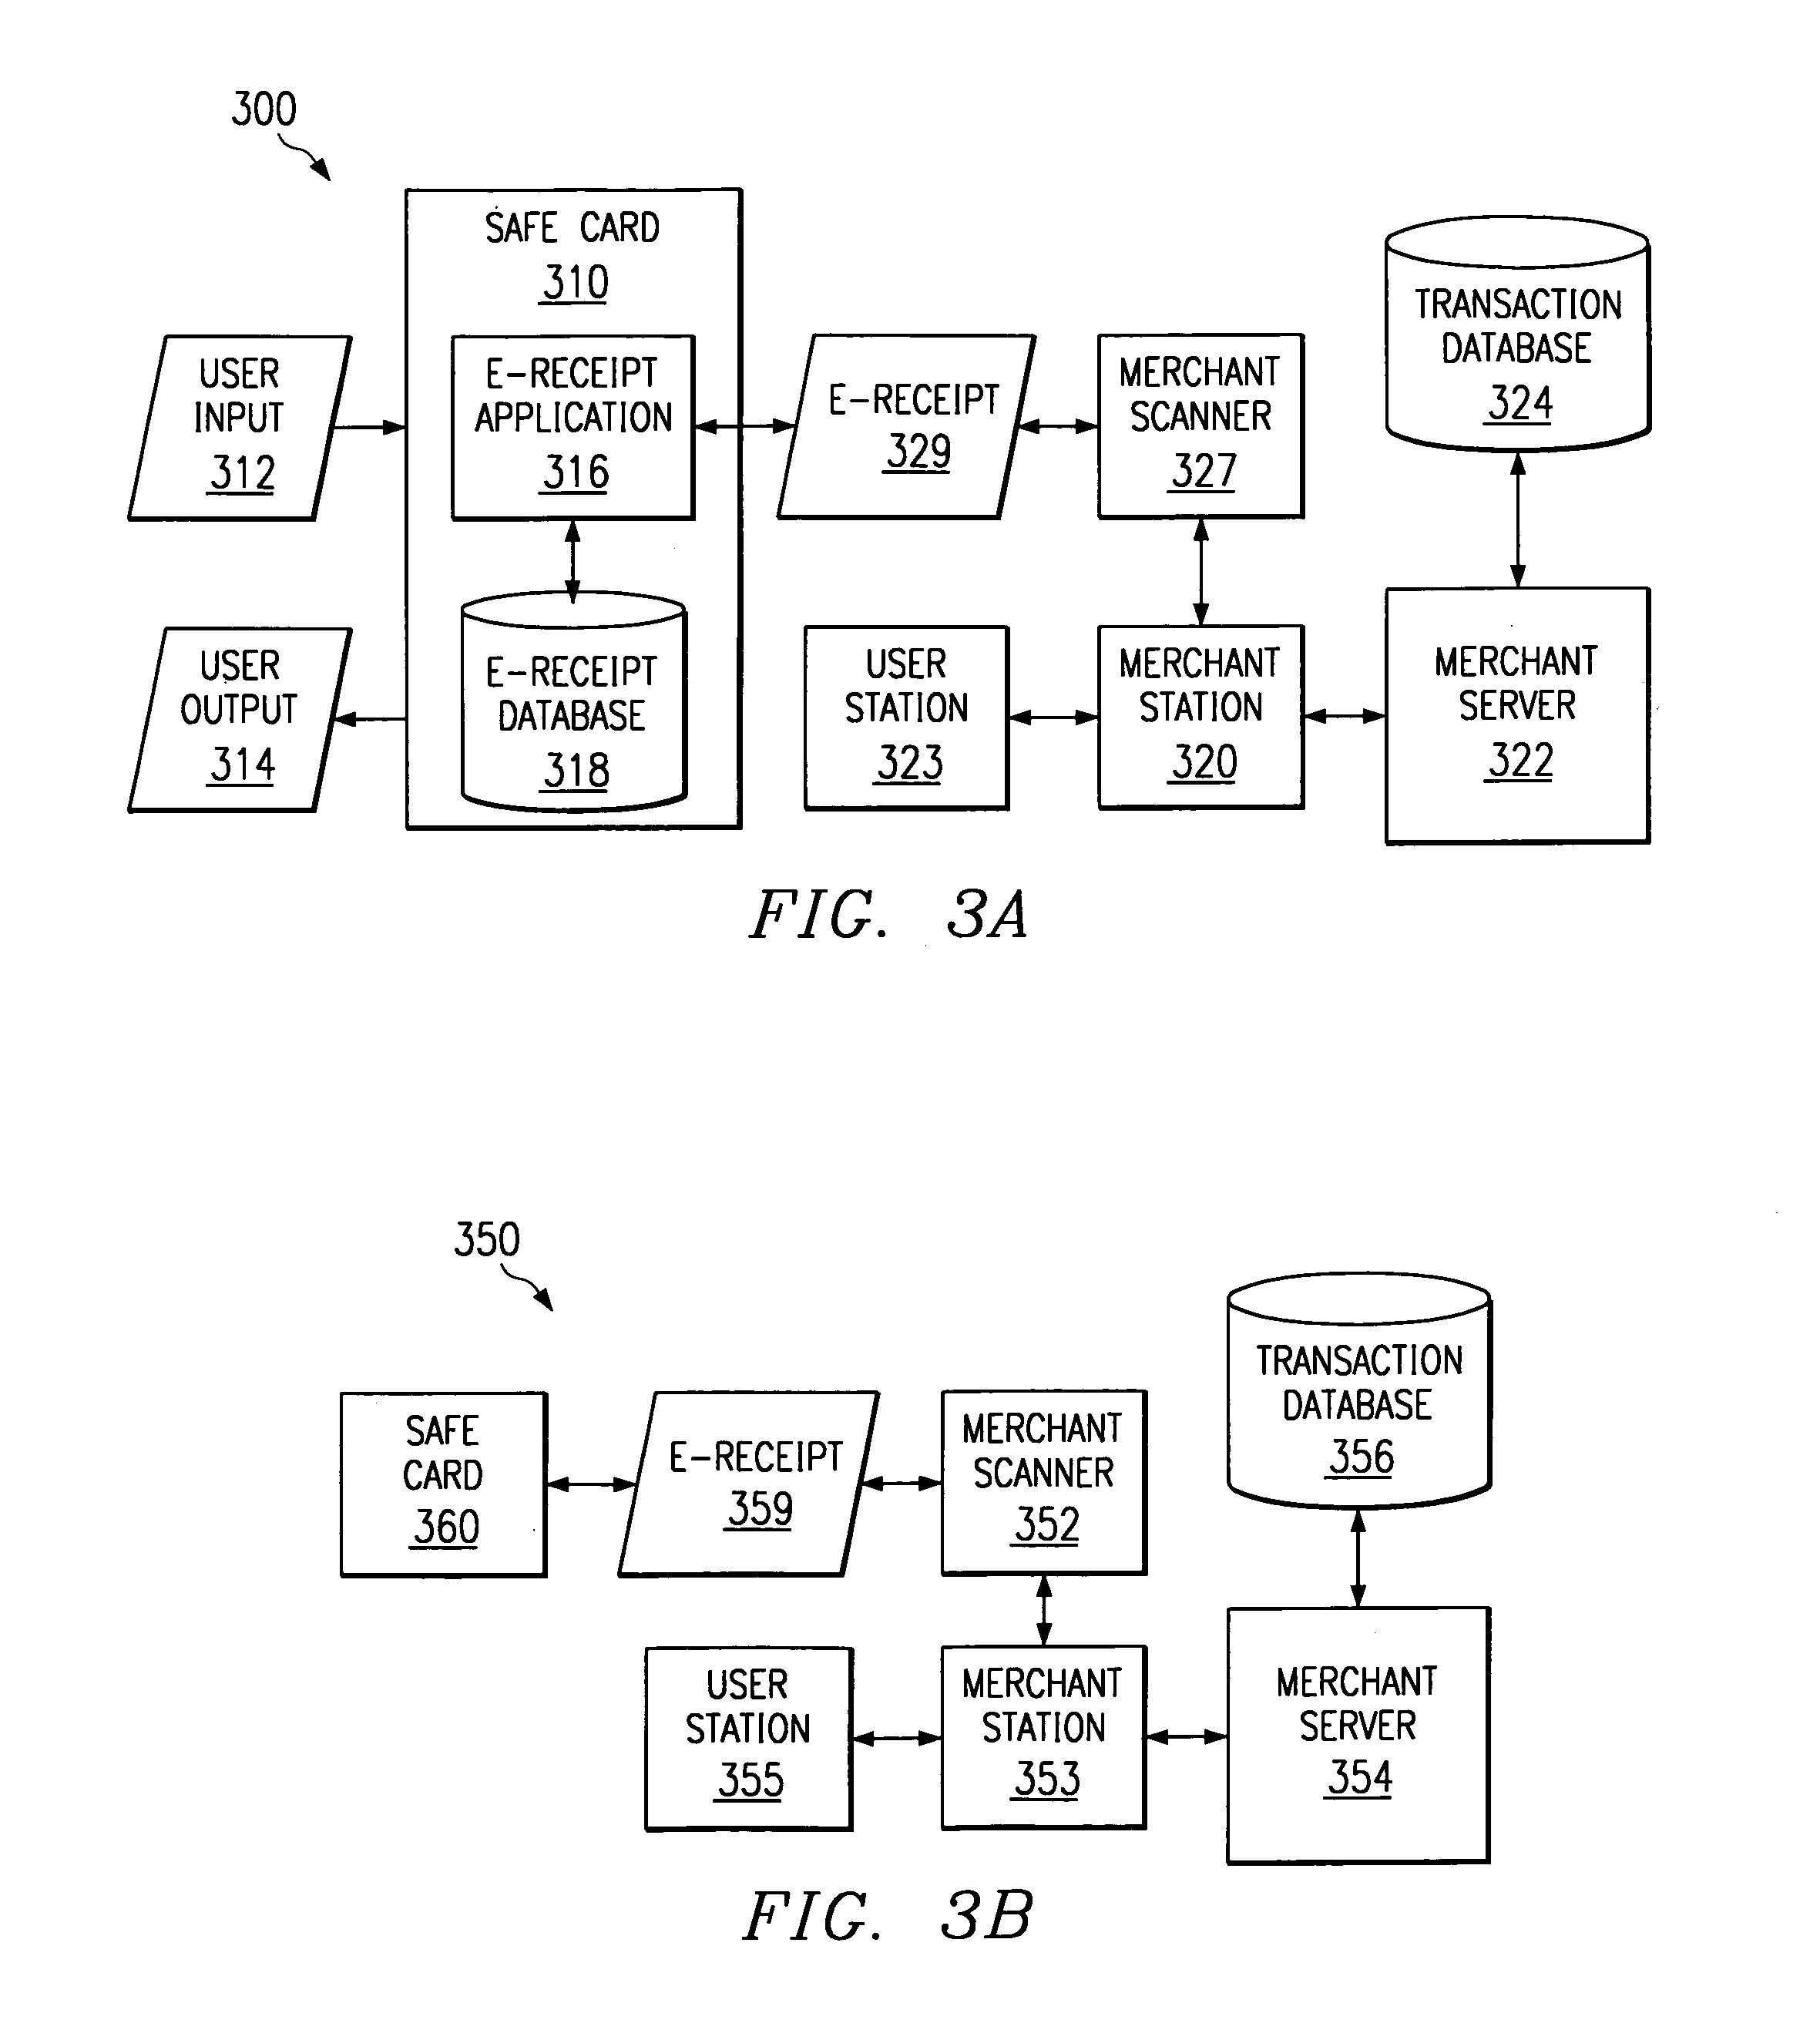 Method and apparatus for encoding transactions for goods and services using an e-receipt